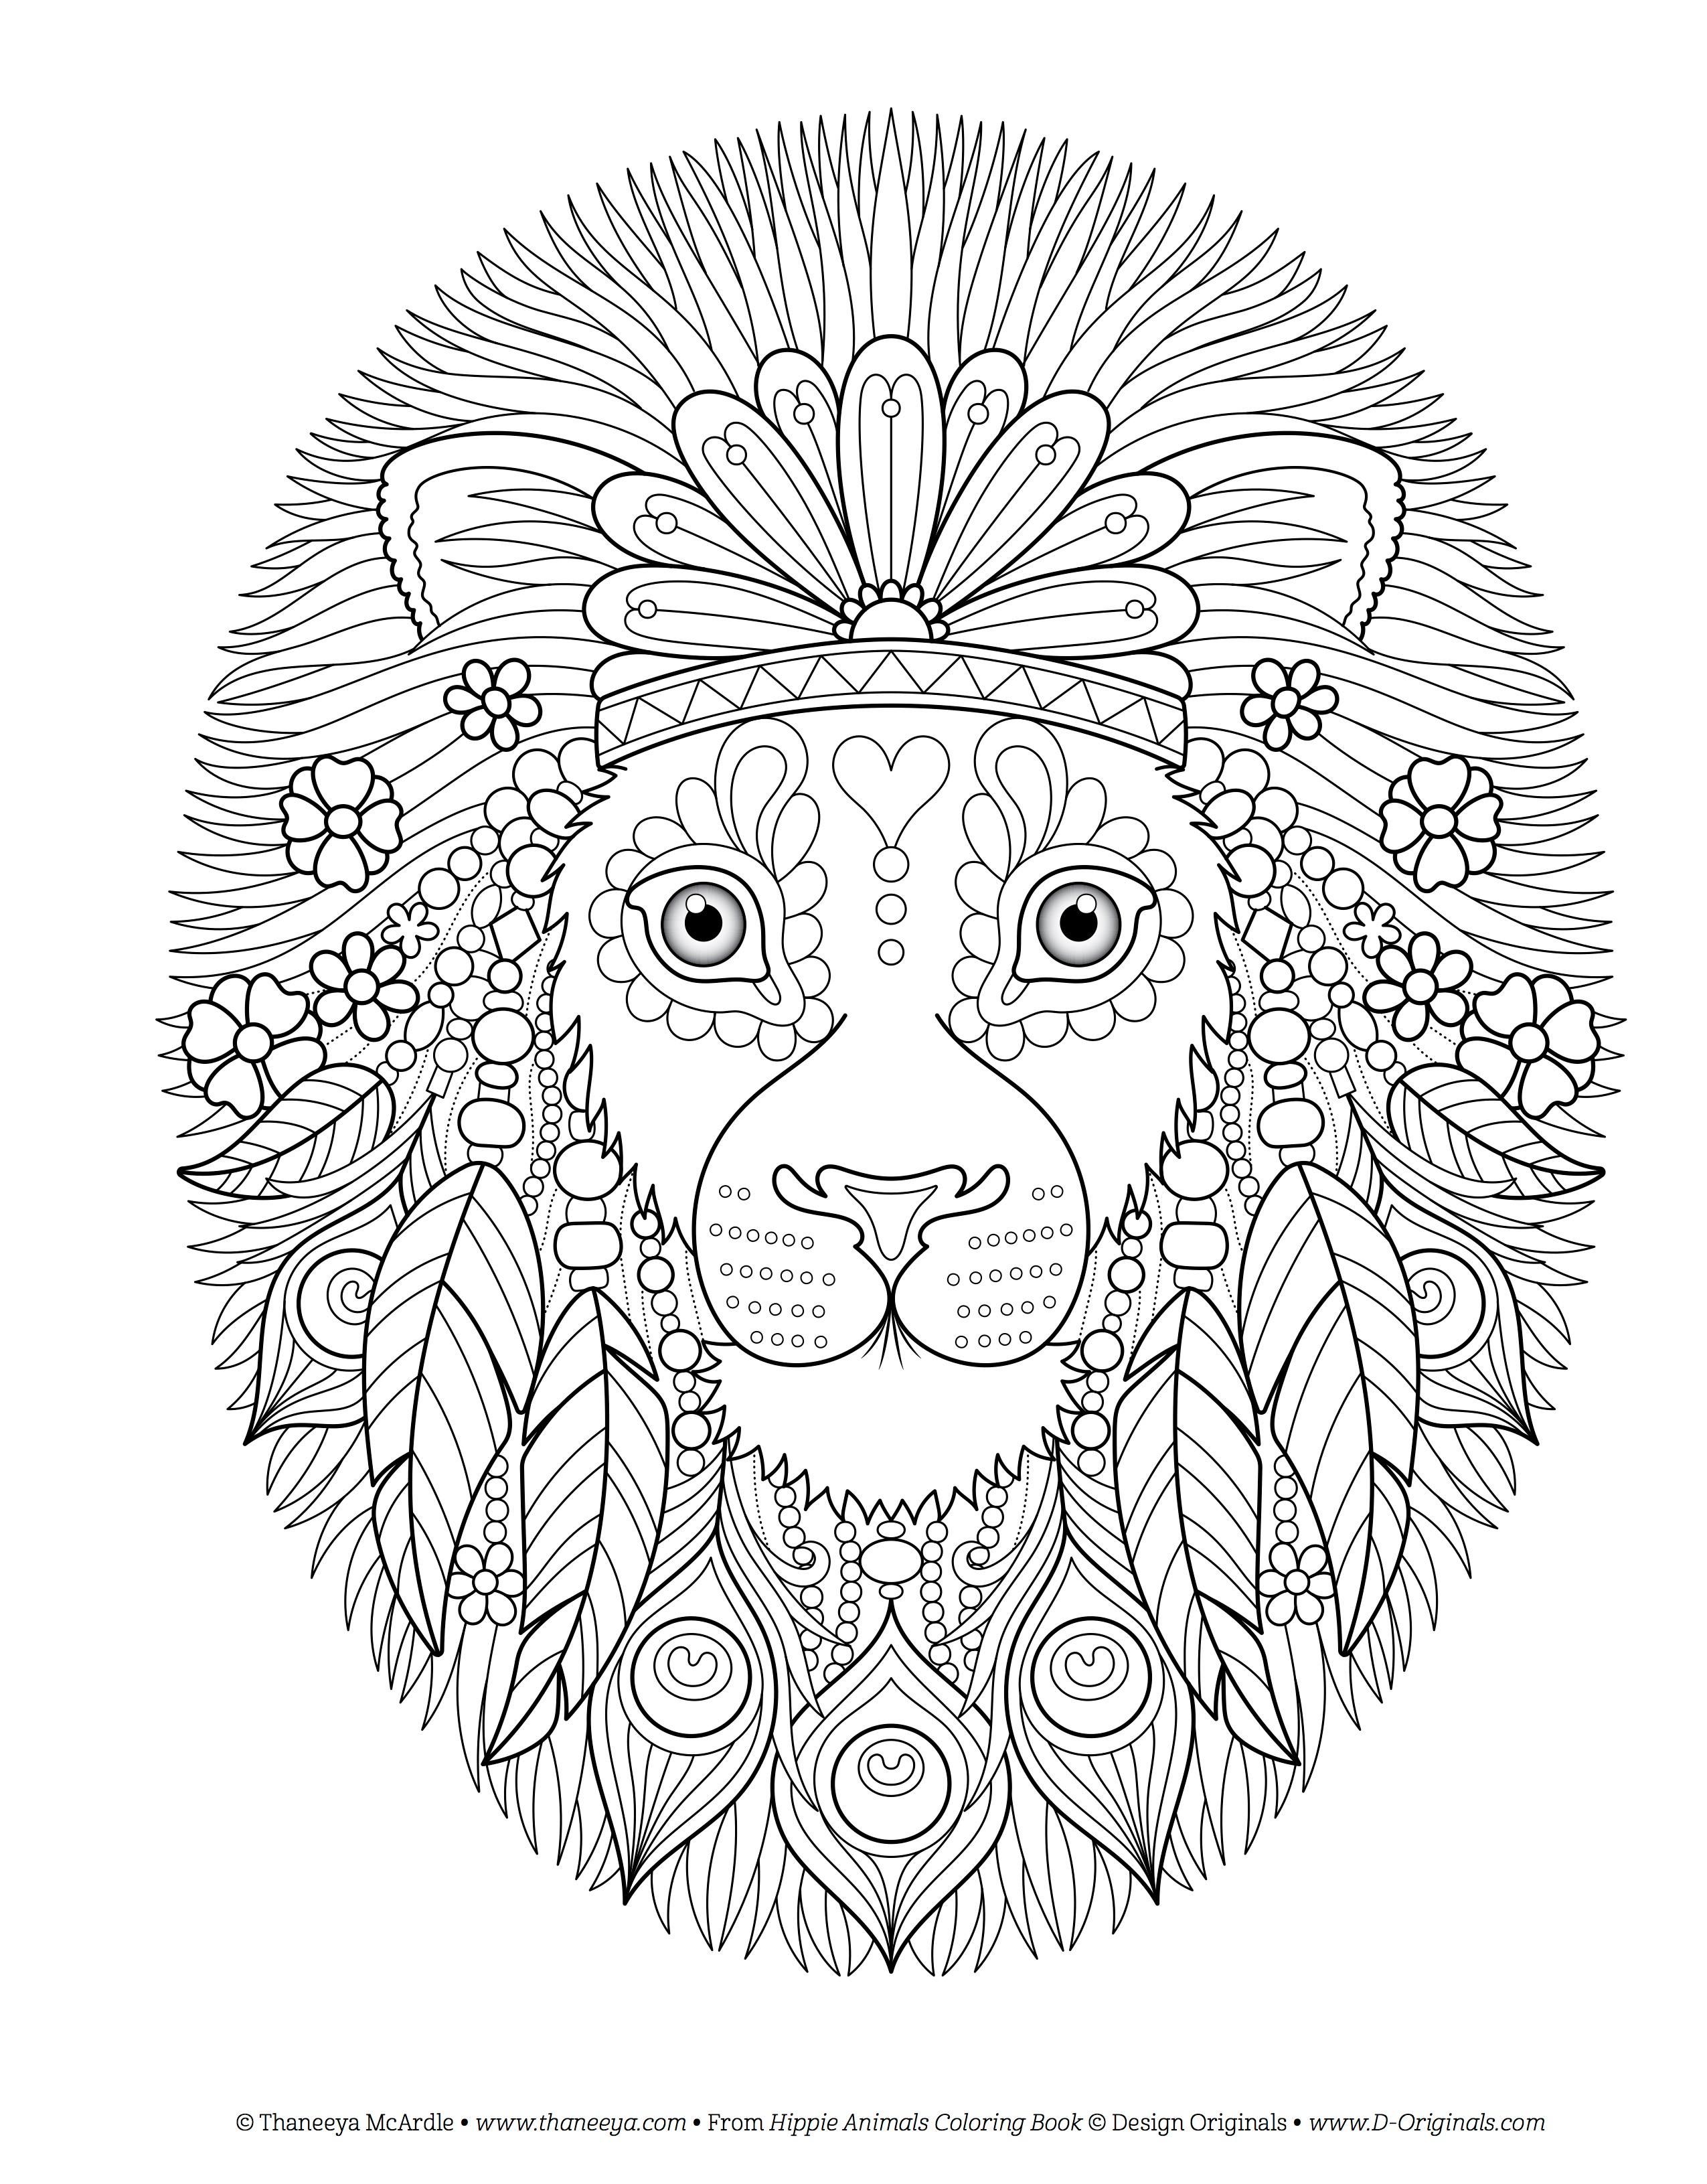 Hippie animals coloring book coloring is fun design originals groovy totally chill animal designs from thaneeya mcardle on high